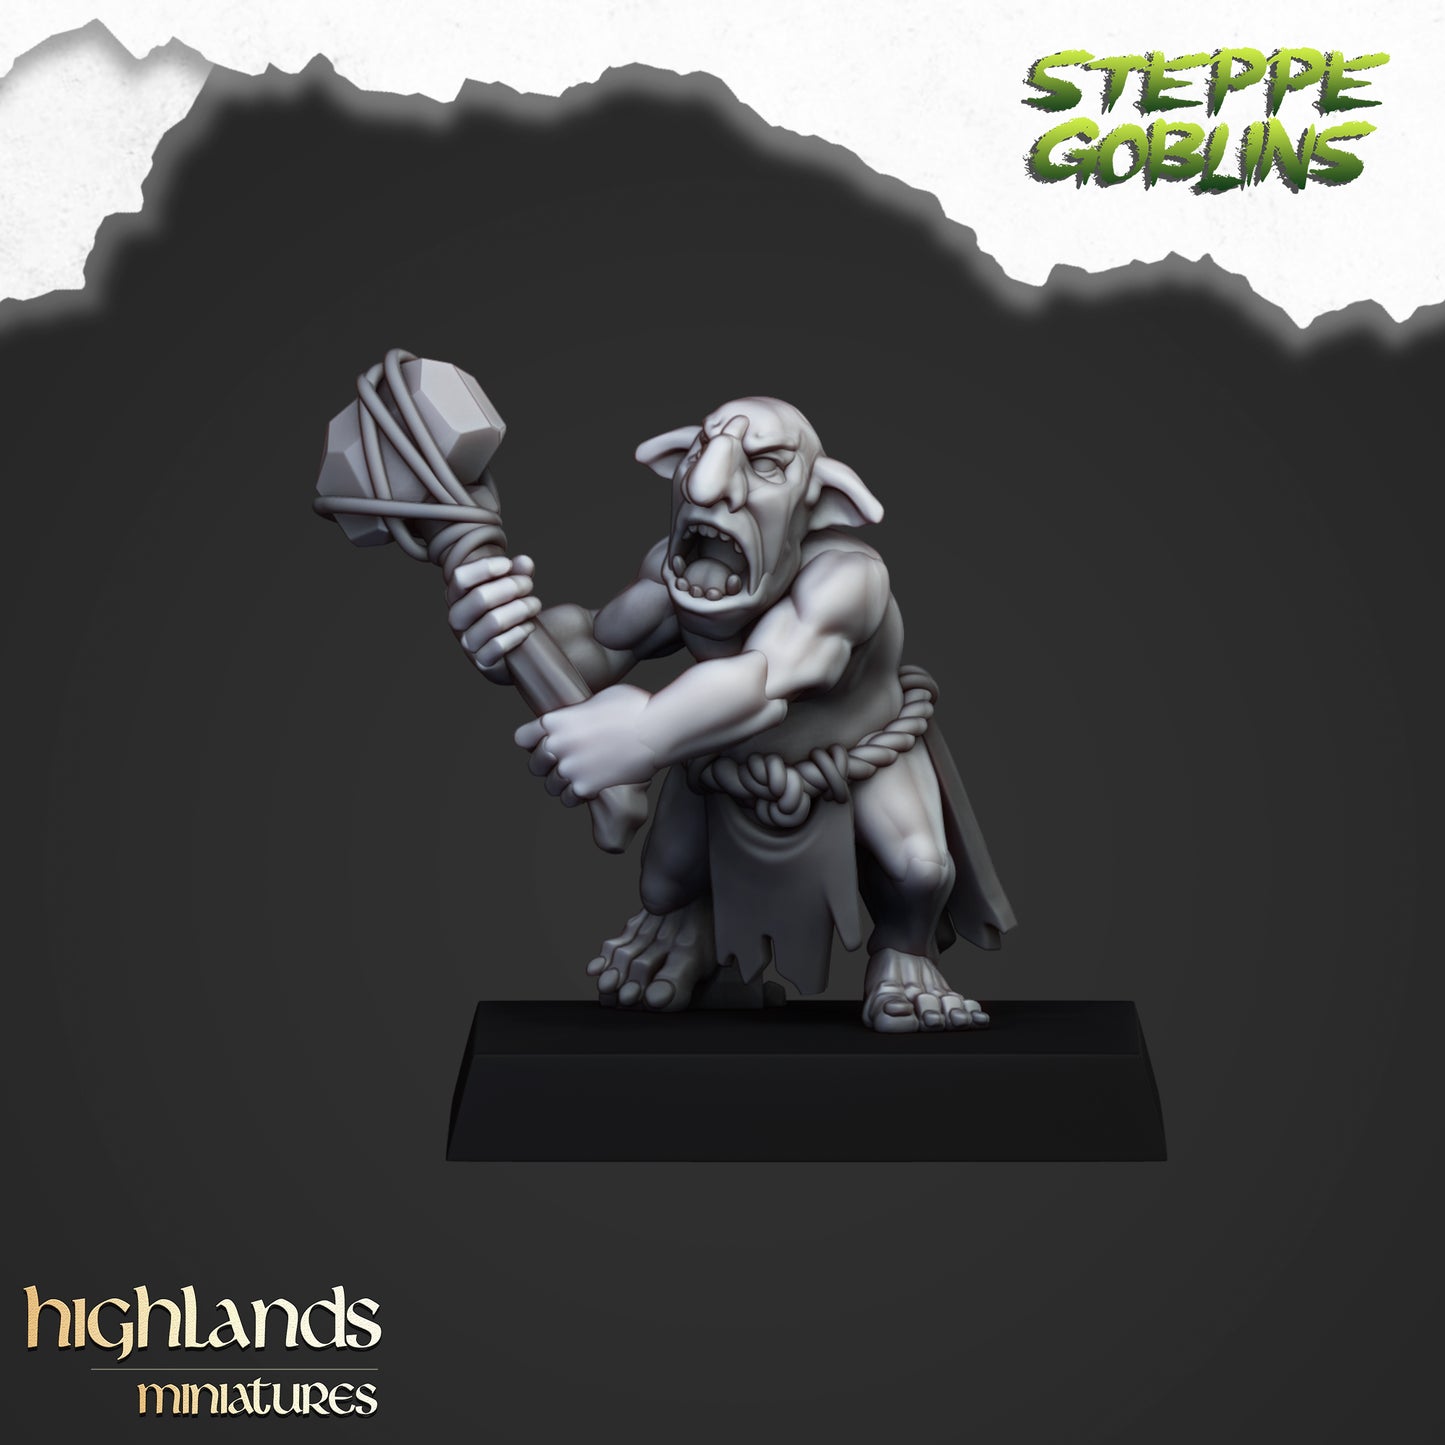 Steppe Goblors from Highlands Miniatures